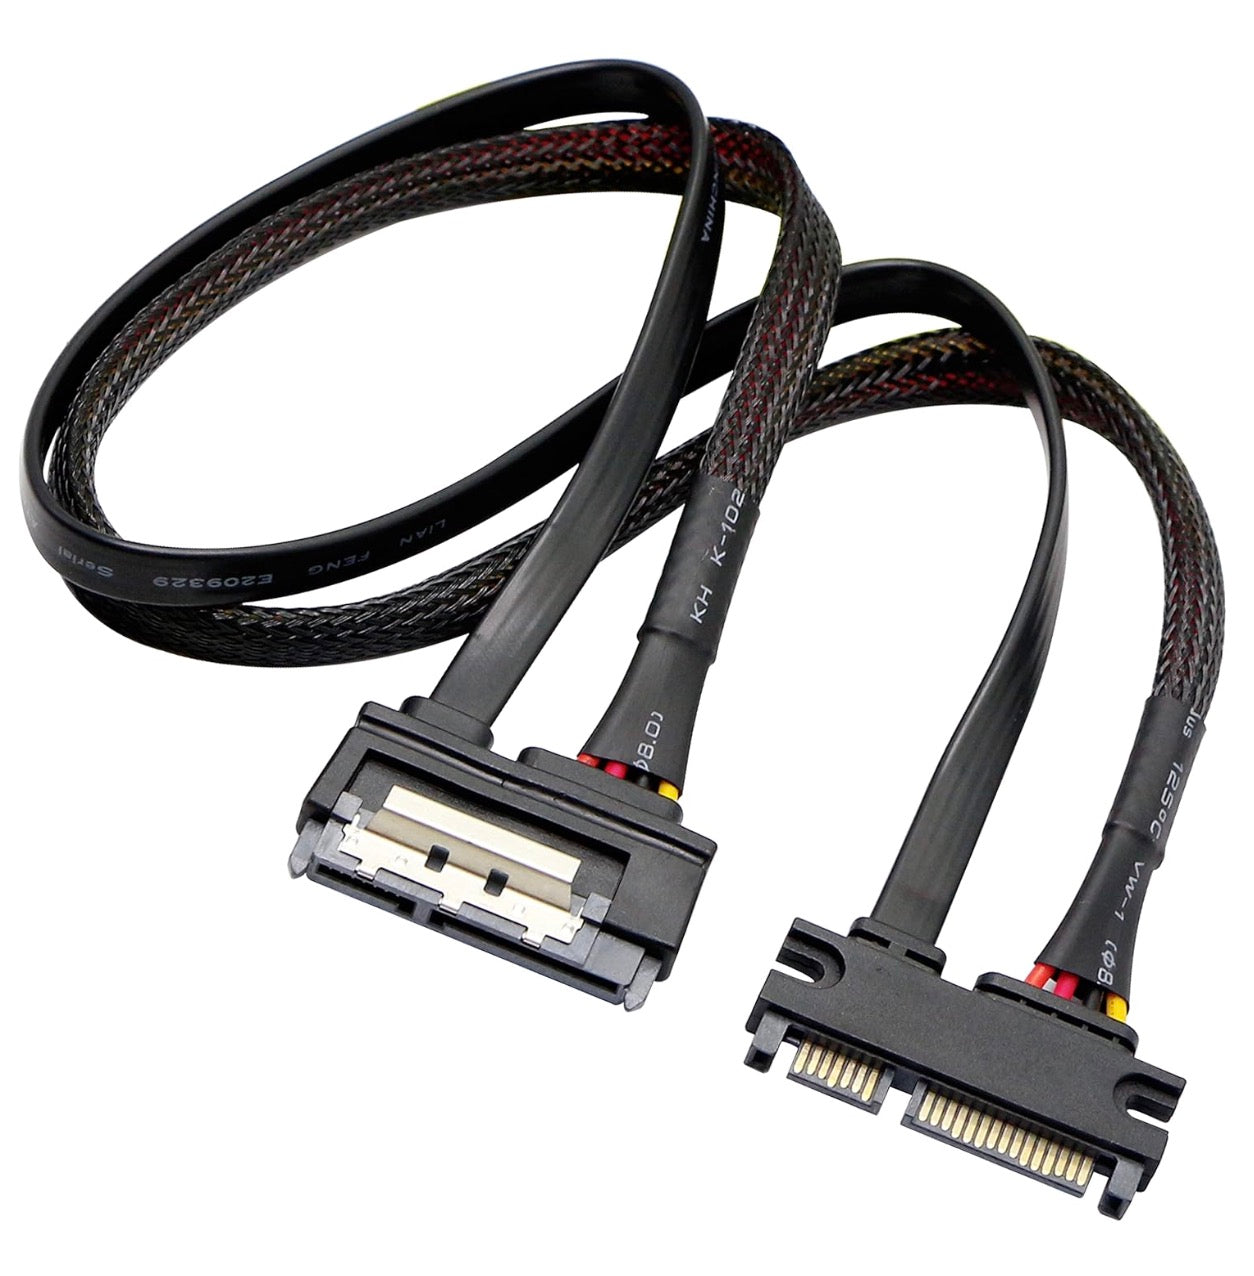 Sata 22Pin Male to Female Data Power Extension Cable for HDD,SSD,Optical Drives, DVD Burners, PCI Cards